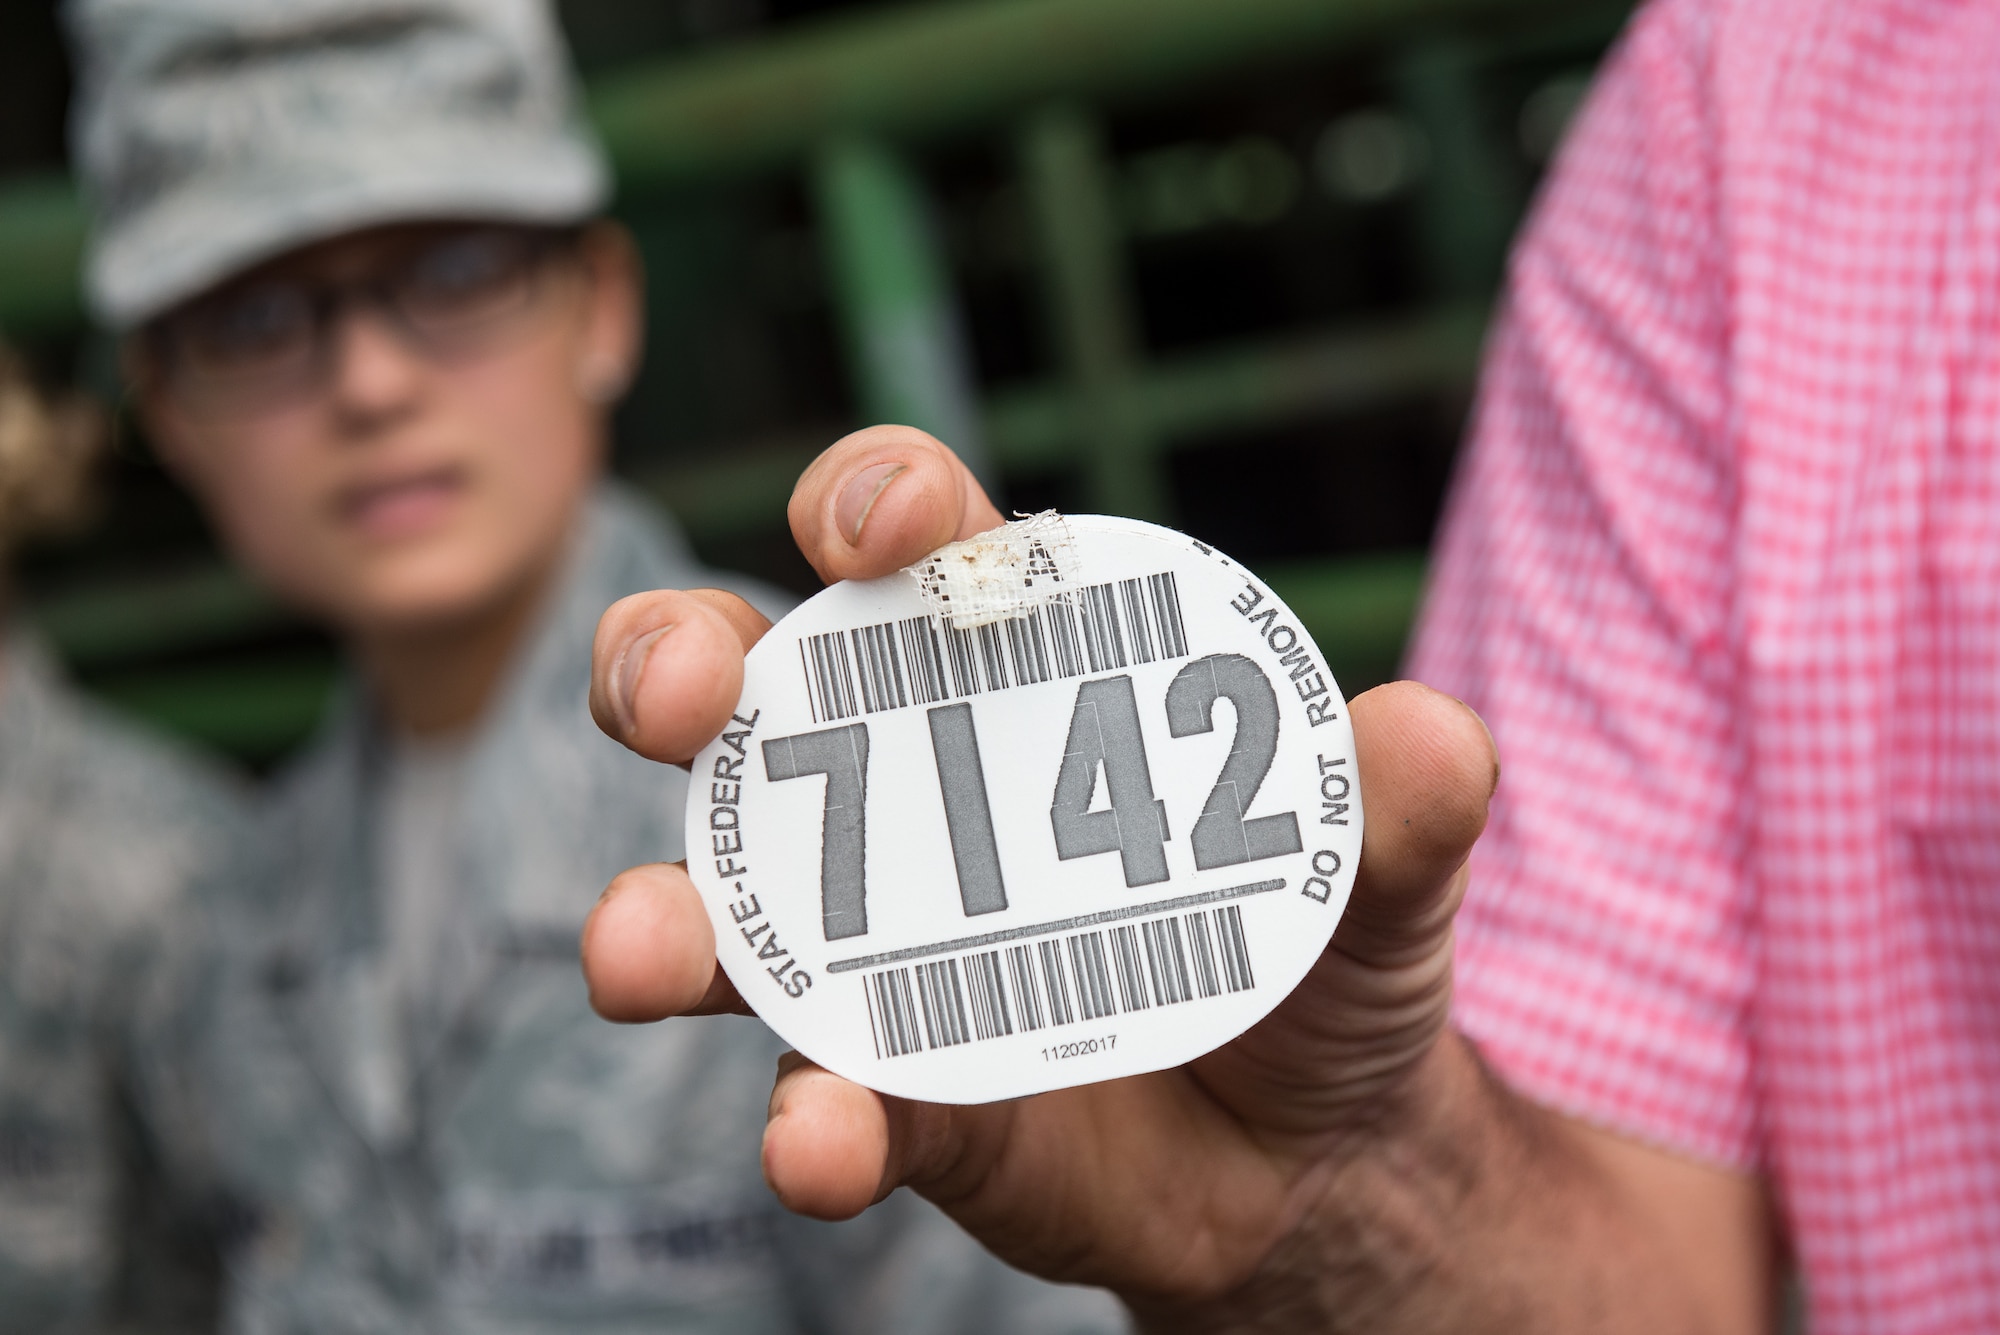 Neal Franke, the co-owner of SEMO Livestock Sales, displays a cattle tag, which is required for livestock sales by both federal and state regulators, during a public health site visit in Jackson, Mo., June 18, 2019. Among other purposes, the tags are used to track feeder livestock supply chains from farm to table to ensure public health regulations are followed. (U.S. Air National Guard photo by Senior Airman Jonathan W. Padish)